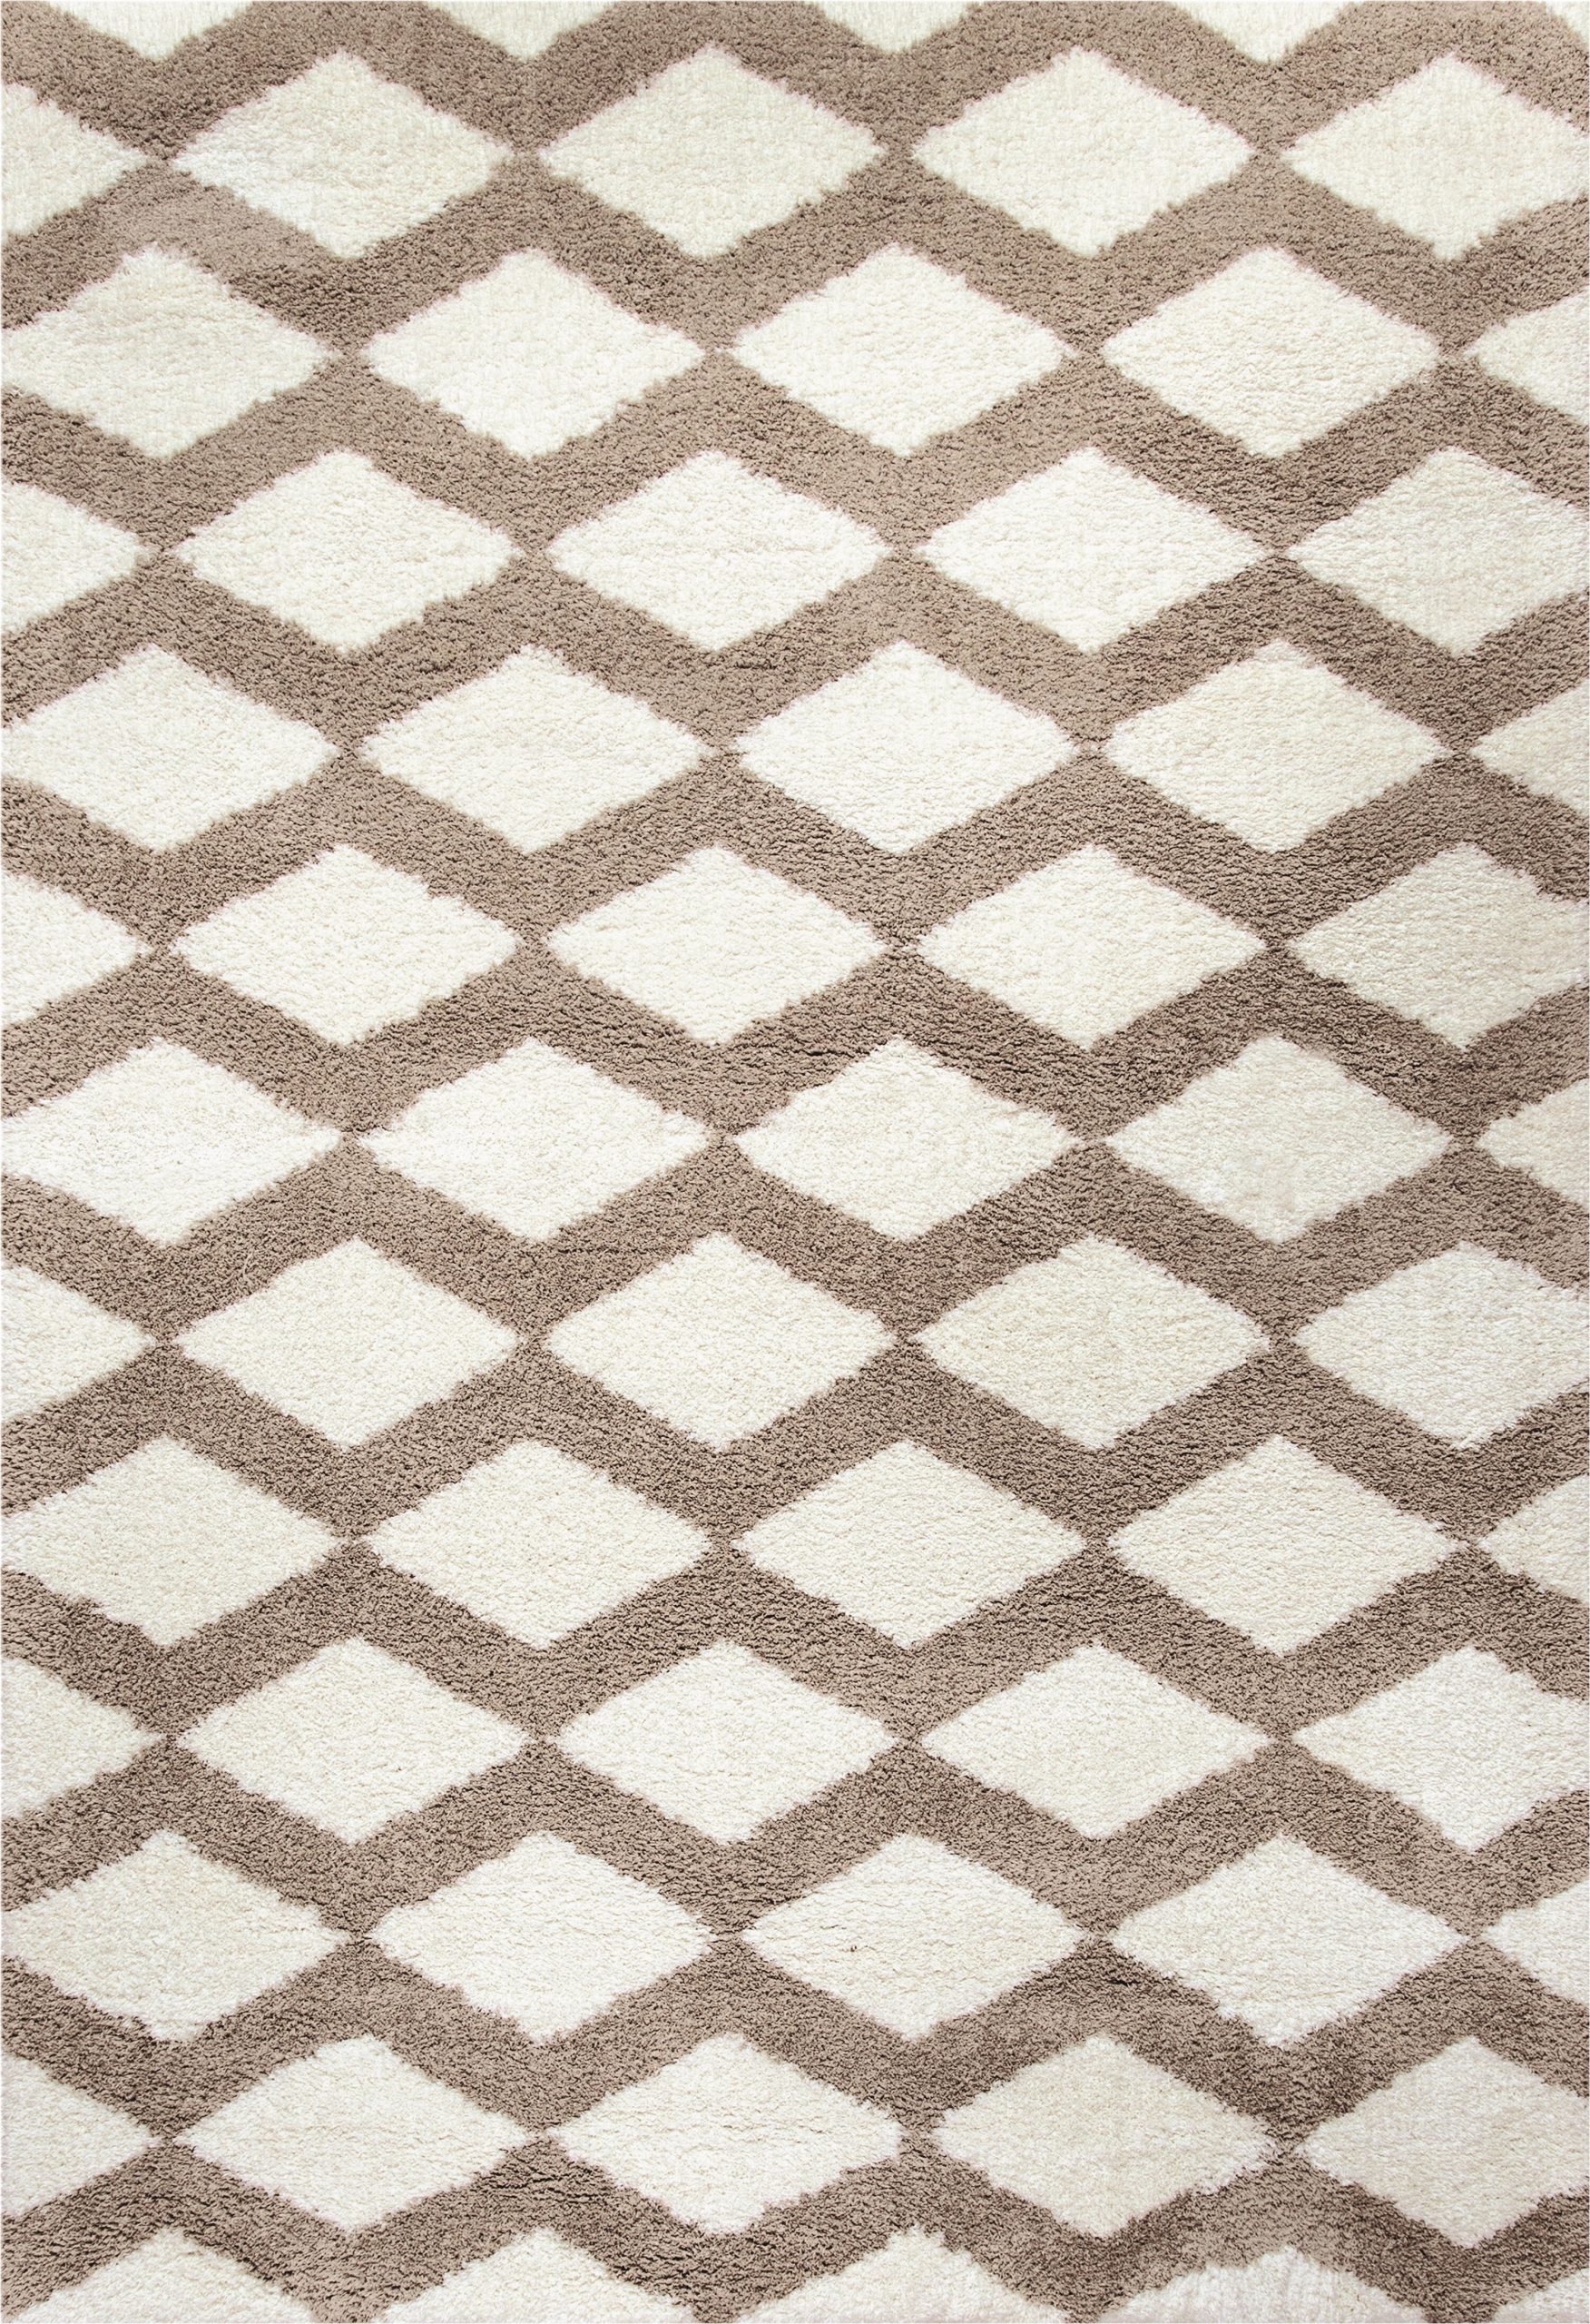 Indoor area Rugs at Lowes Lowes White Beige area Rug